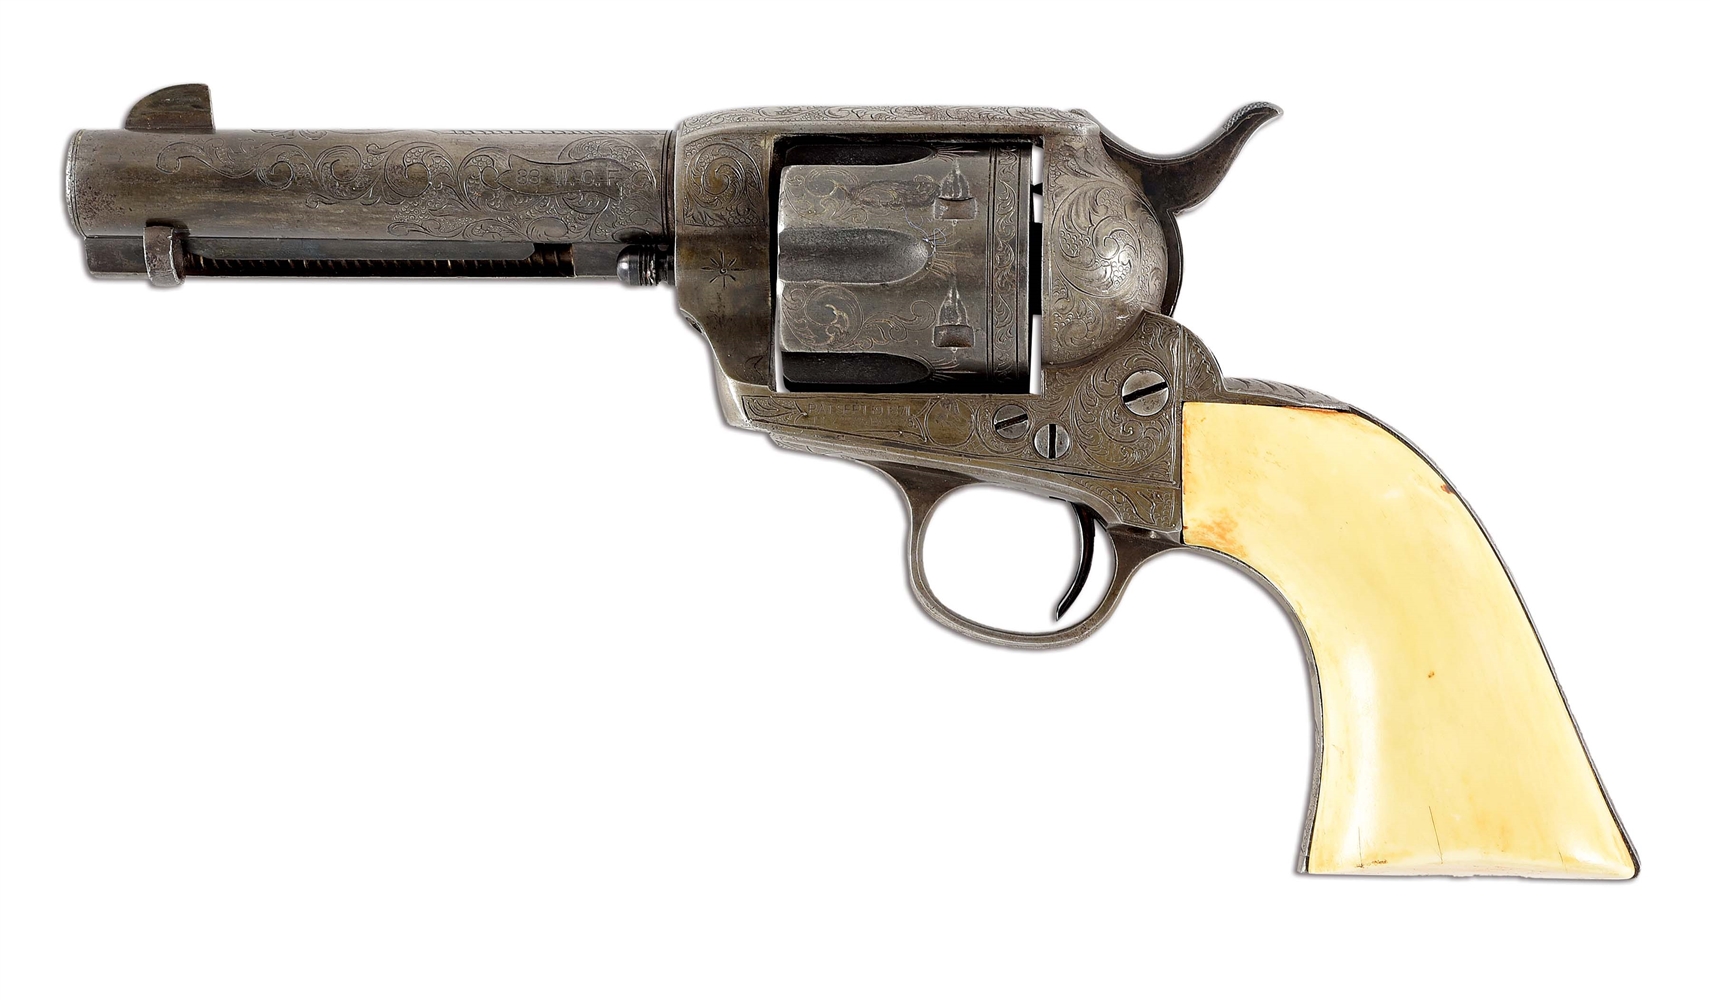 (A) CUSTOM ENGRAVED COLT SINGLE ACTION ARMY REVOLVER WITH IVORY GRIPS & FACTORY LETTER.